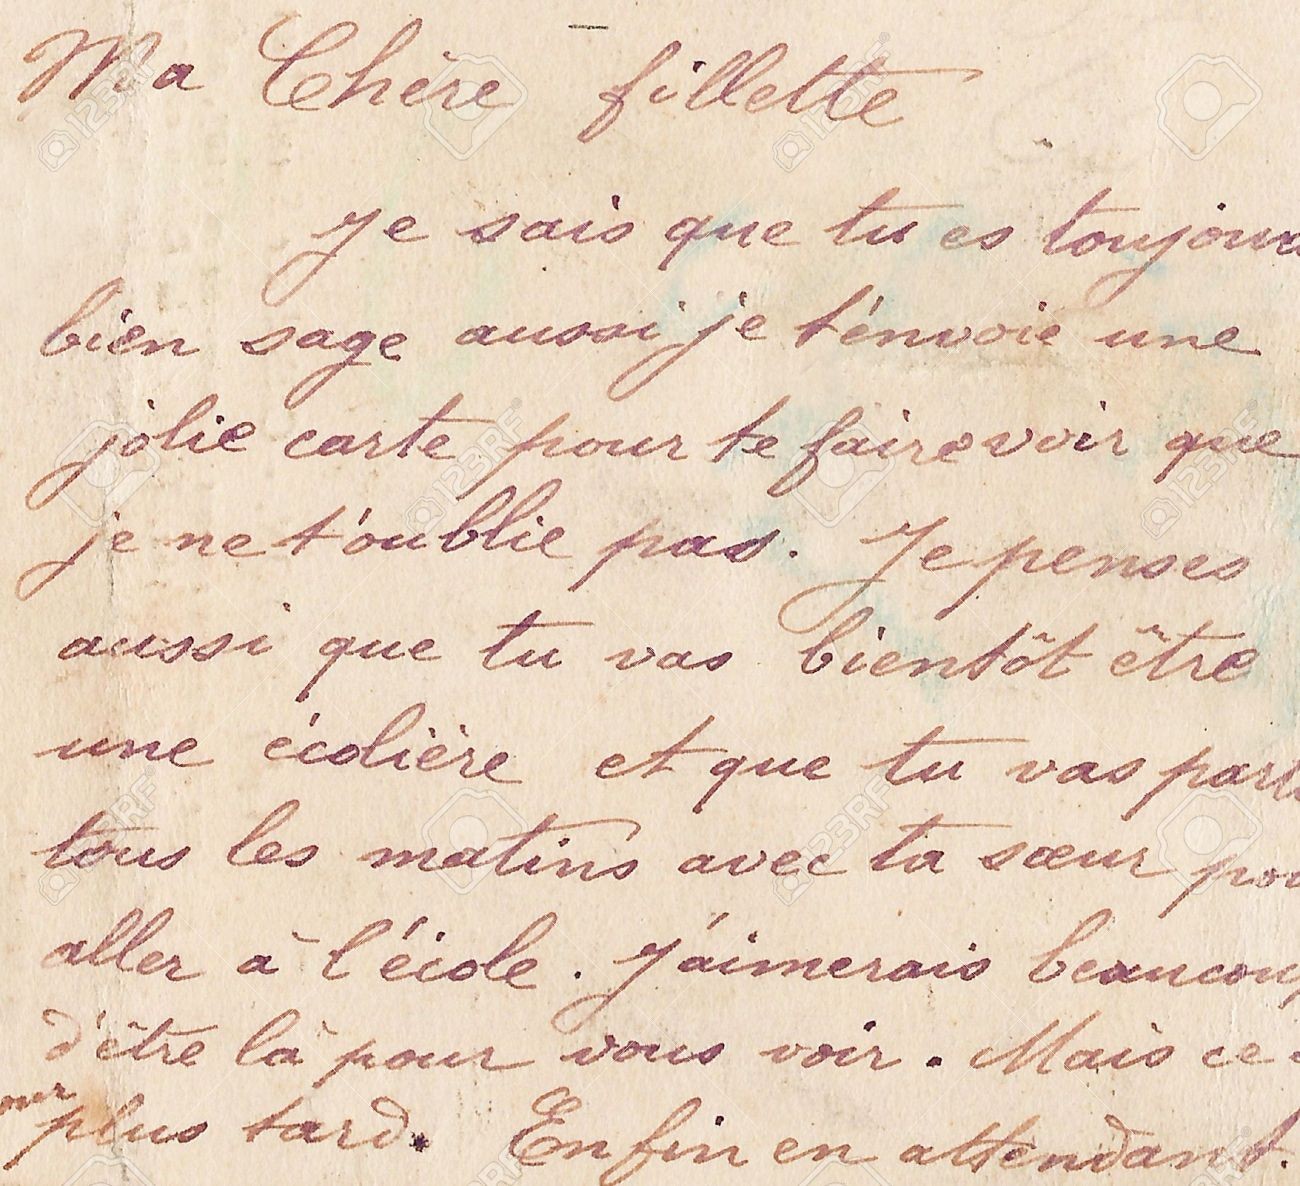 3169187-handwriting-in-french-on-old-letter.jpg